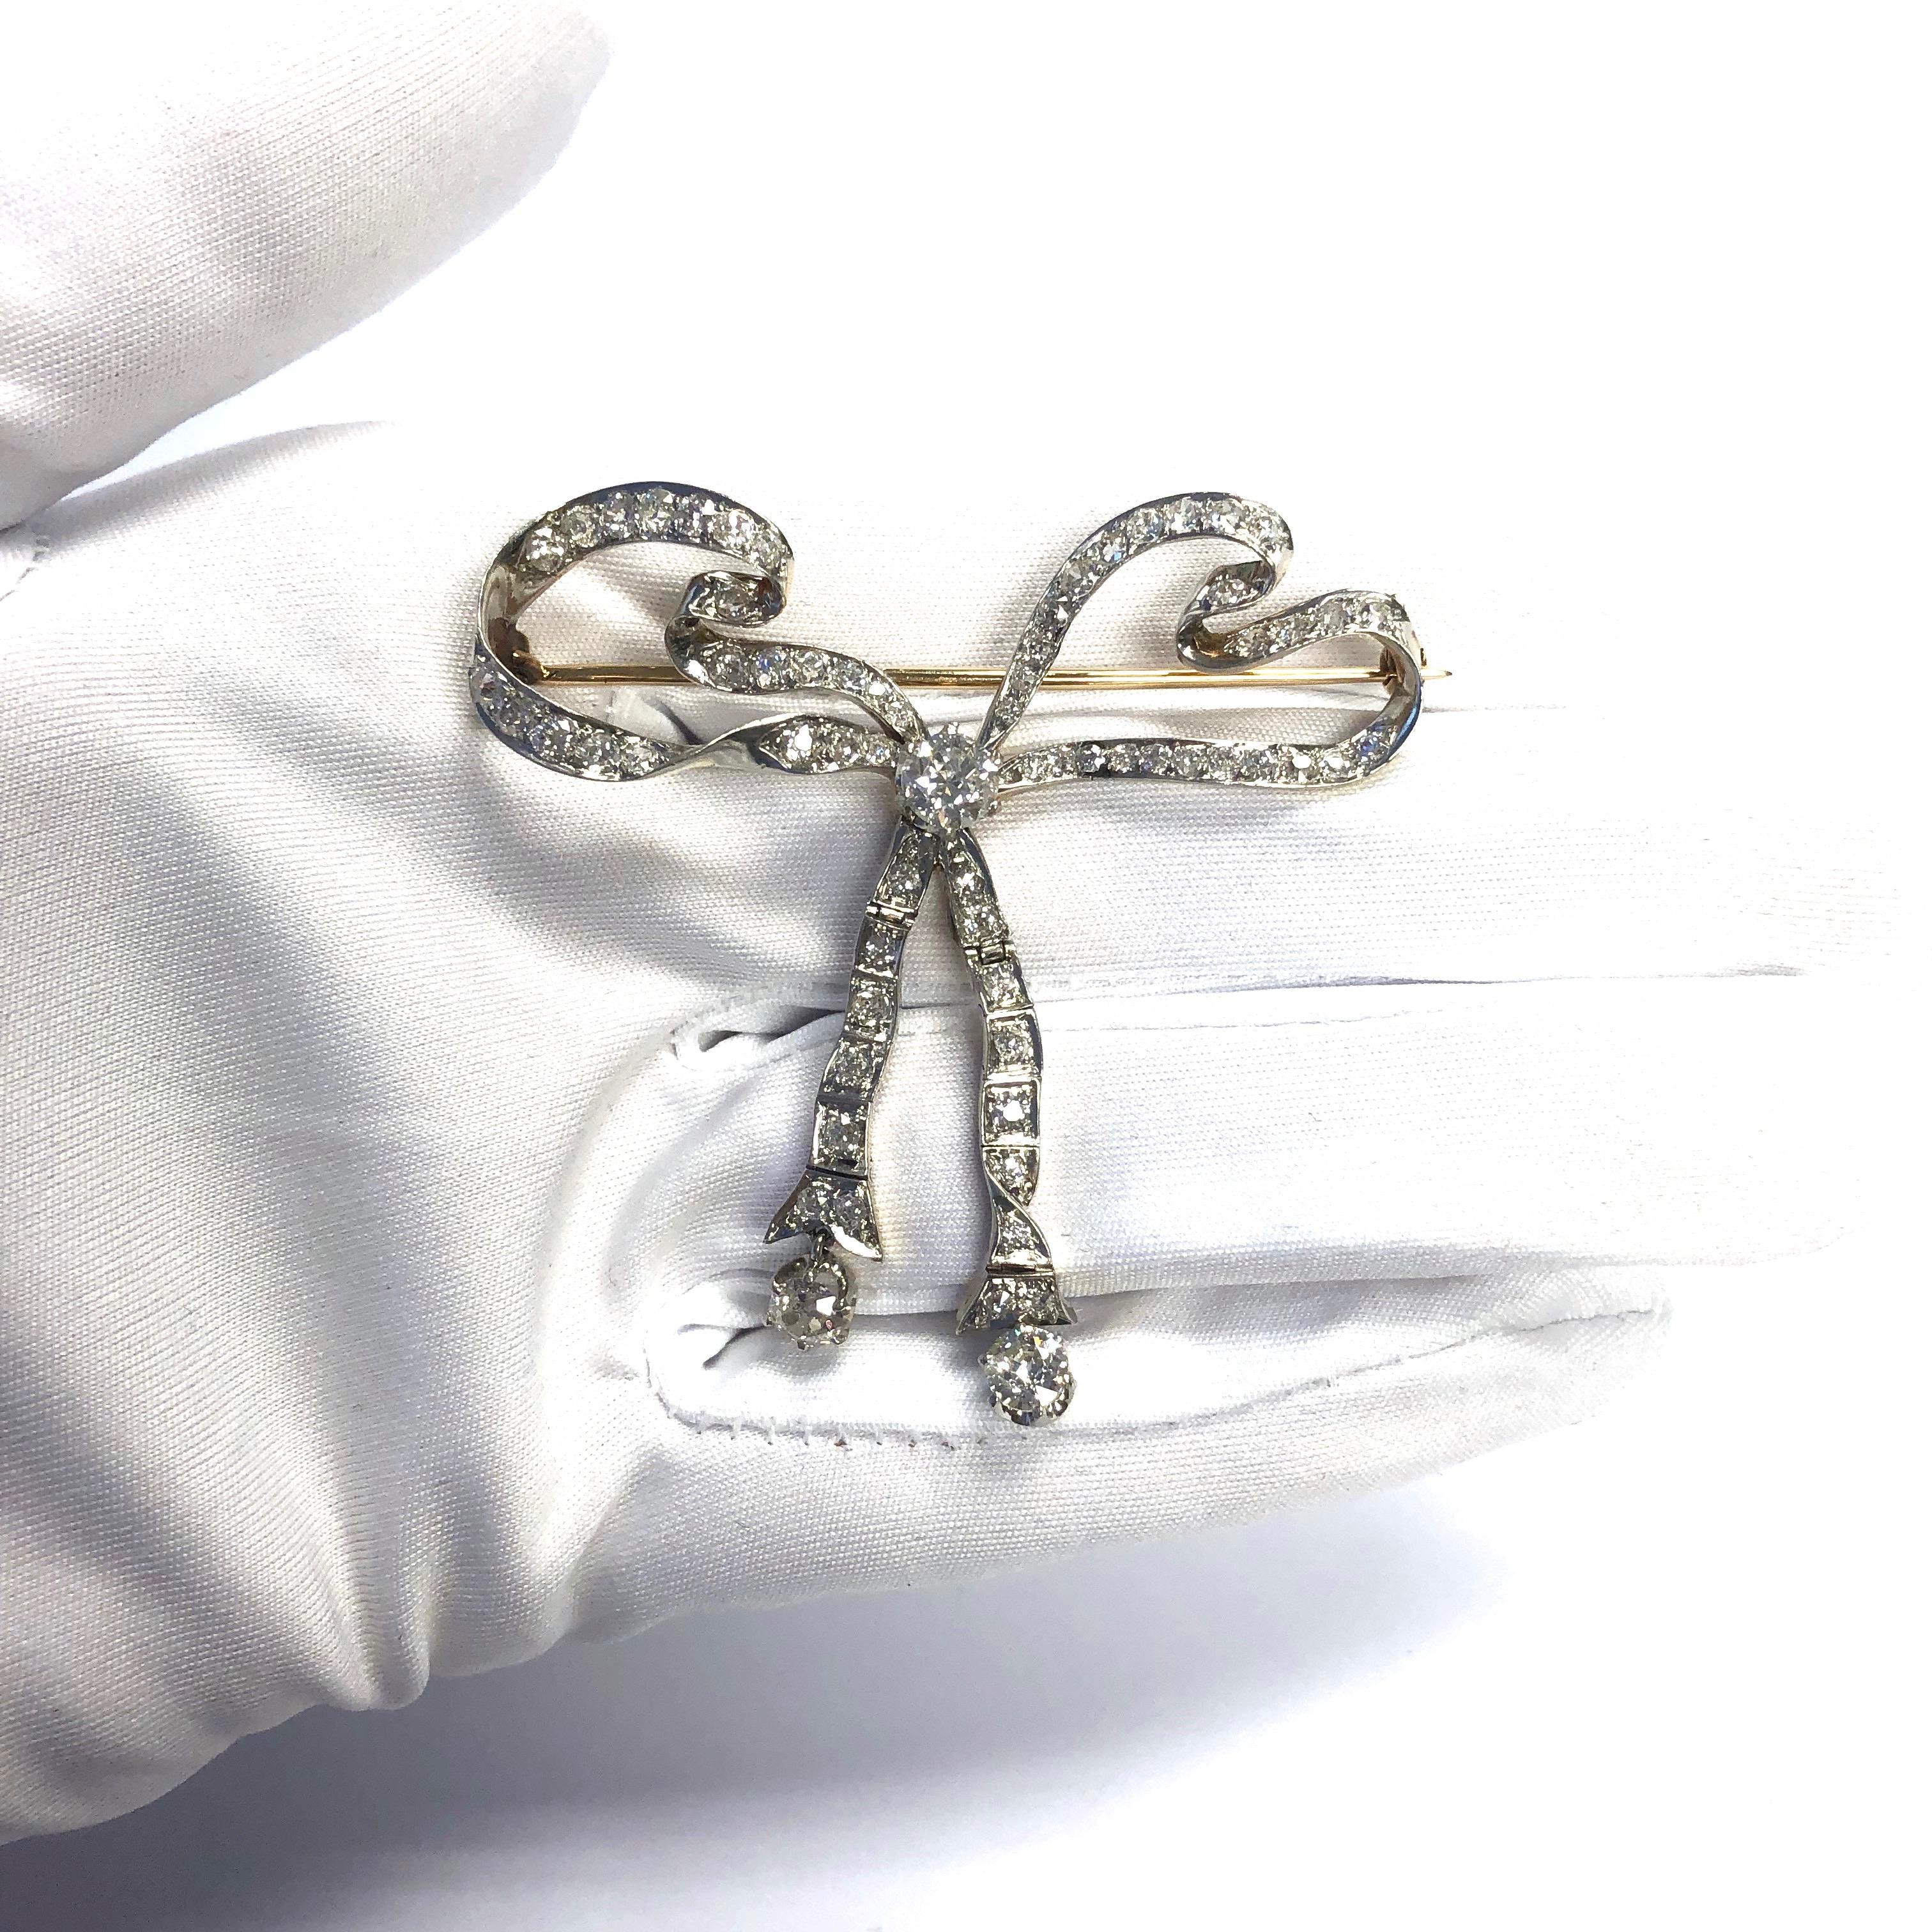 Antique 4 Carat of Diamonds Platinum Gold Articulating Bow Pin In Good Condition For Sale In Agoura Hills, CA